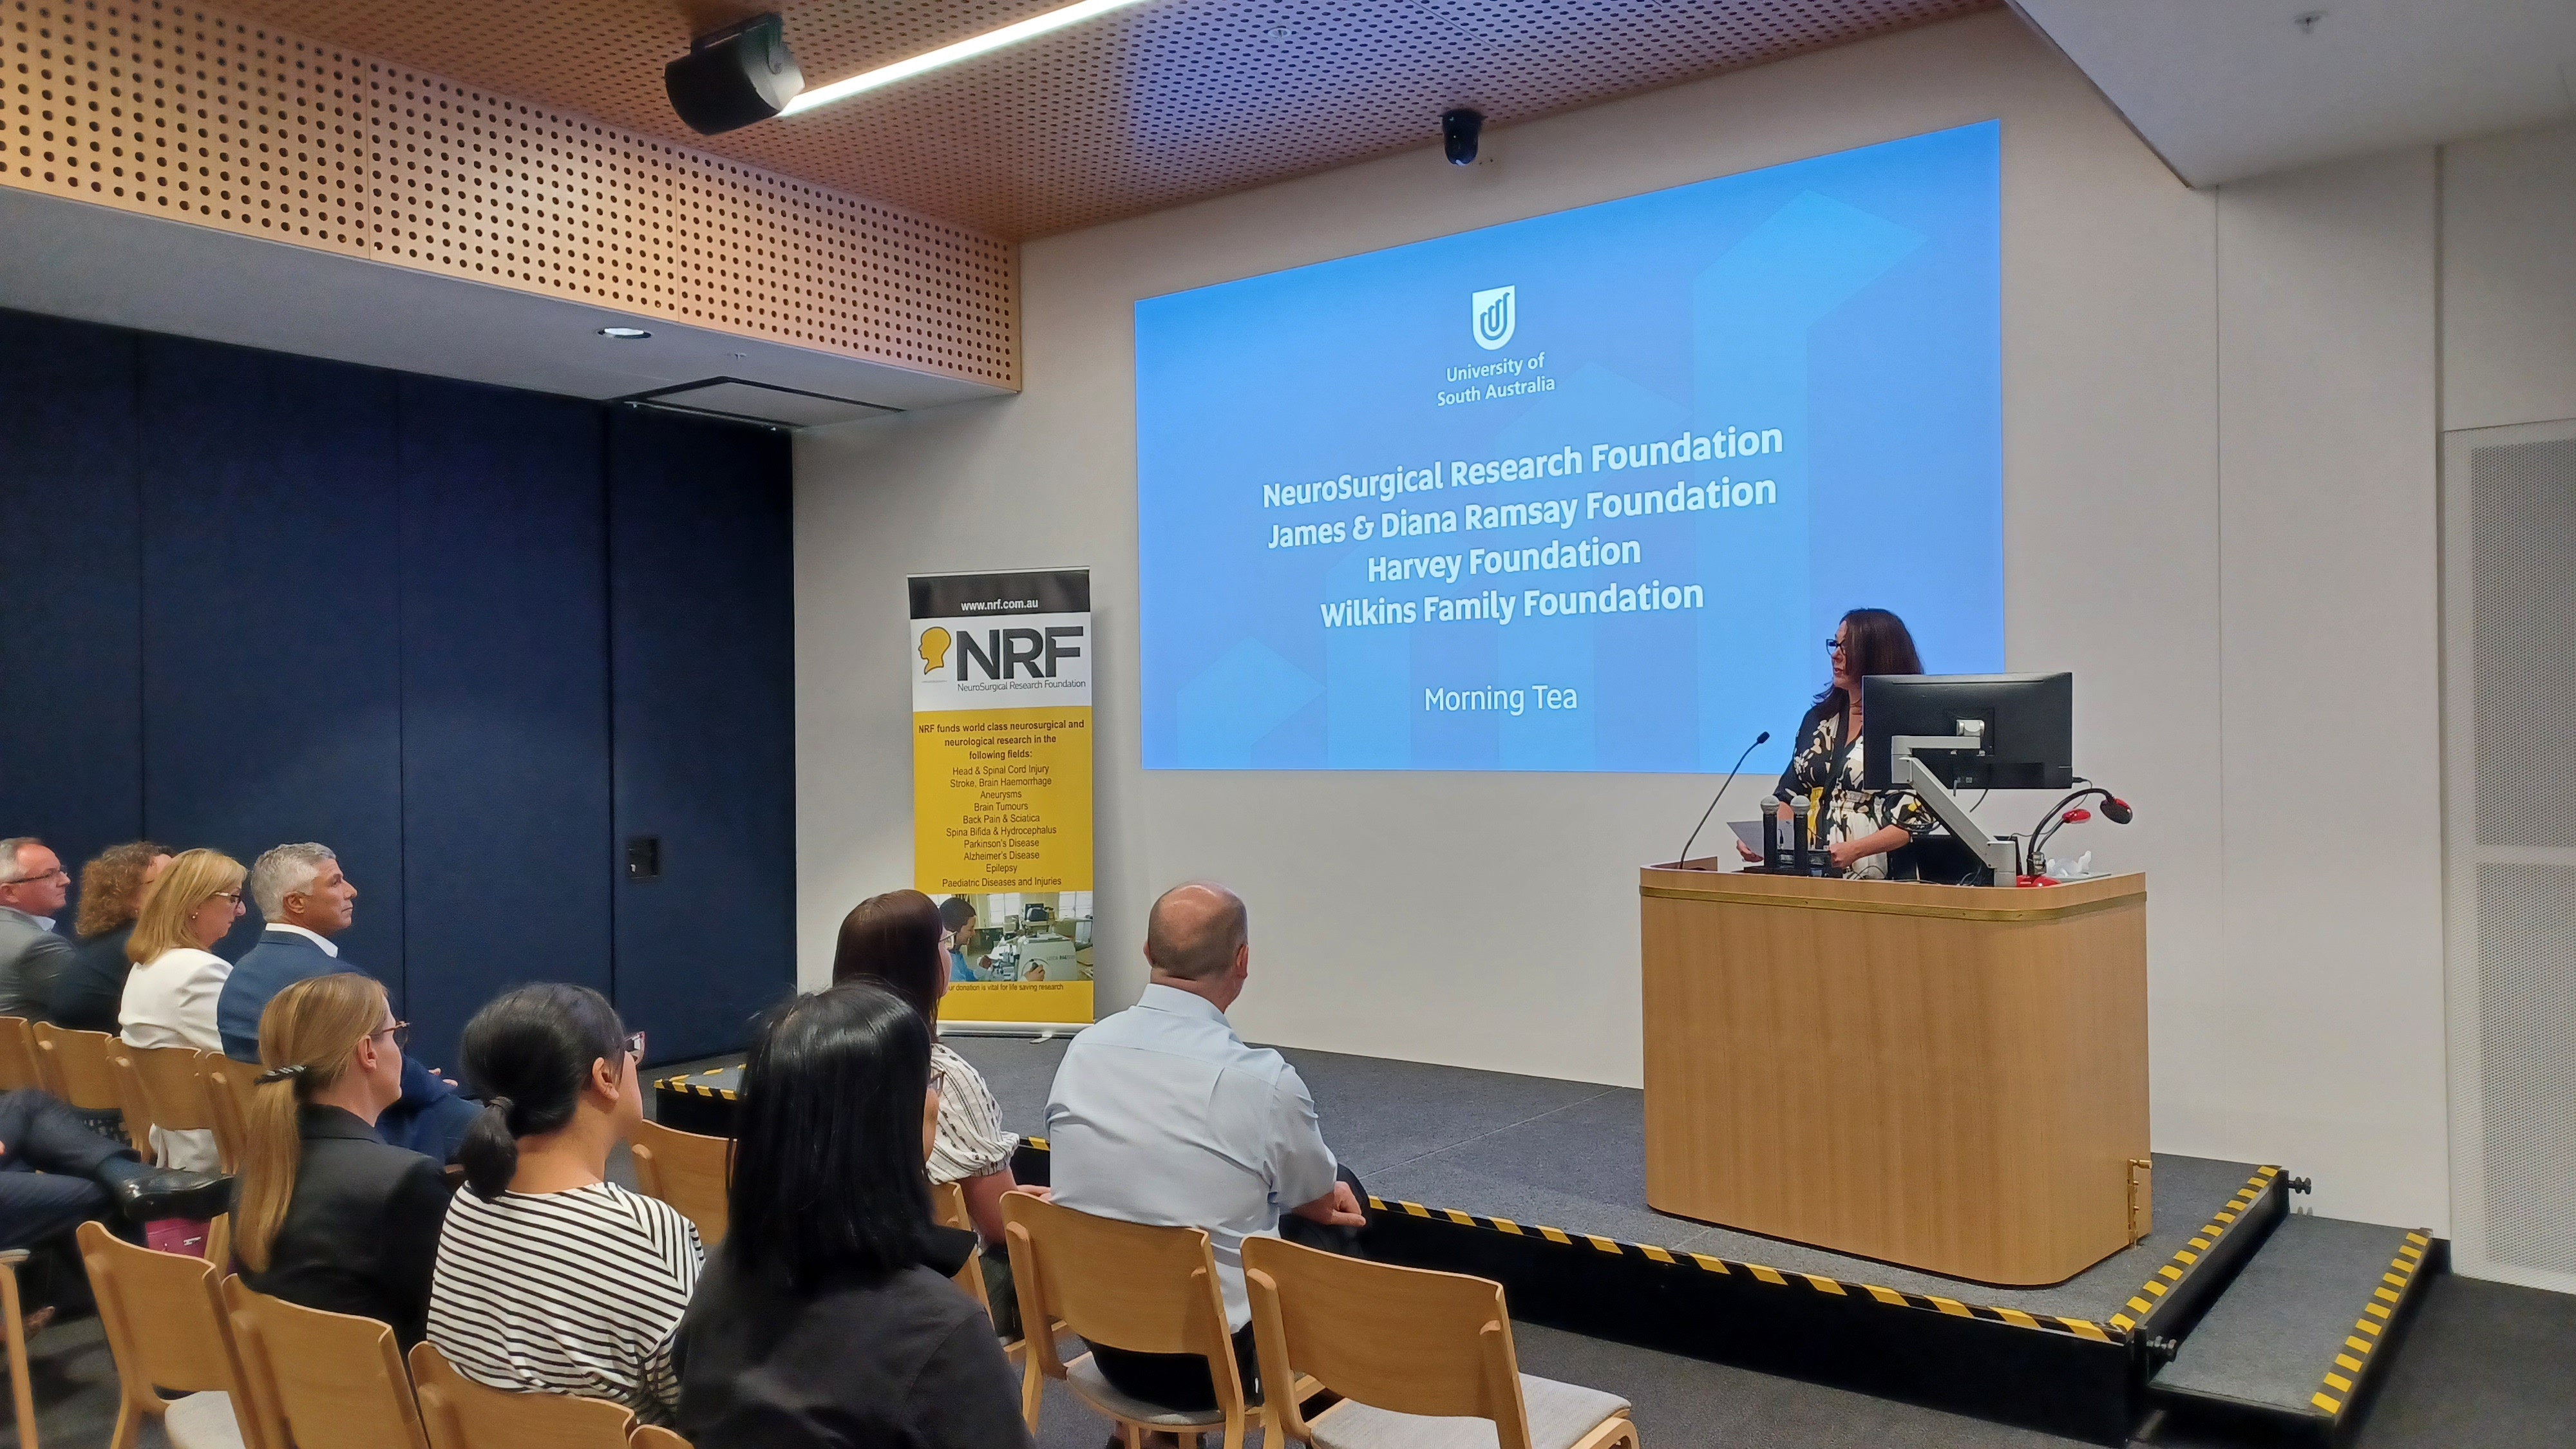 Ten years of funding – over $1M towards NRF research image